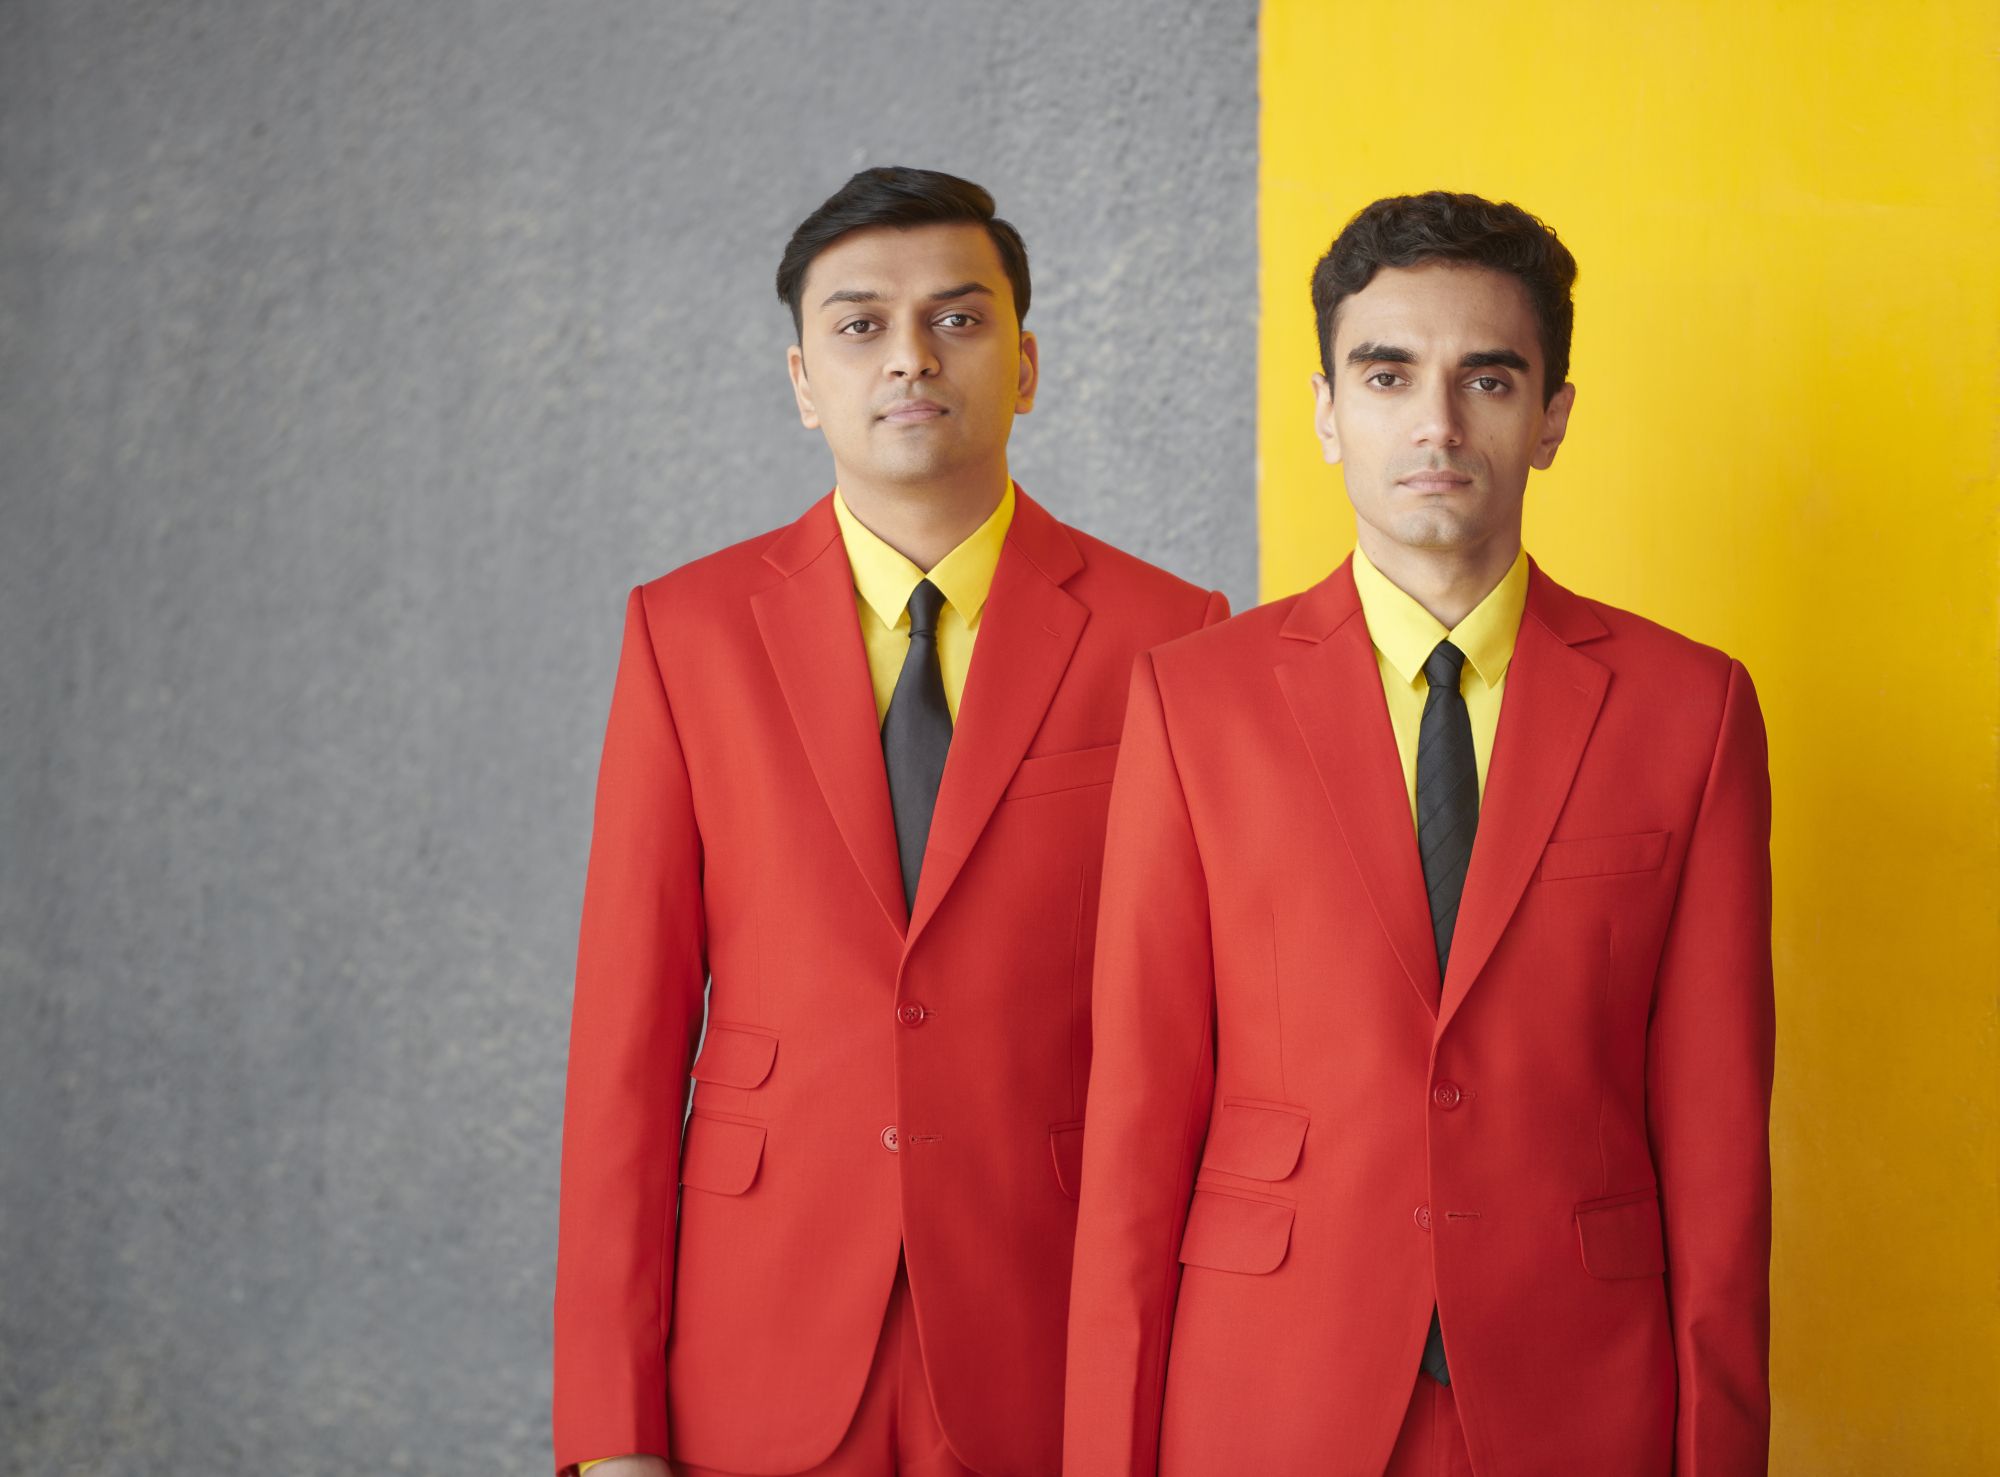 Photograph of Parekh & Singh in bright red suits. Parekh & Singh are wearing bright red suits, yellow shirts and black ties. The background is dark concrete and a painted yellow stripe.